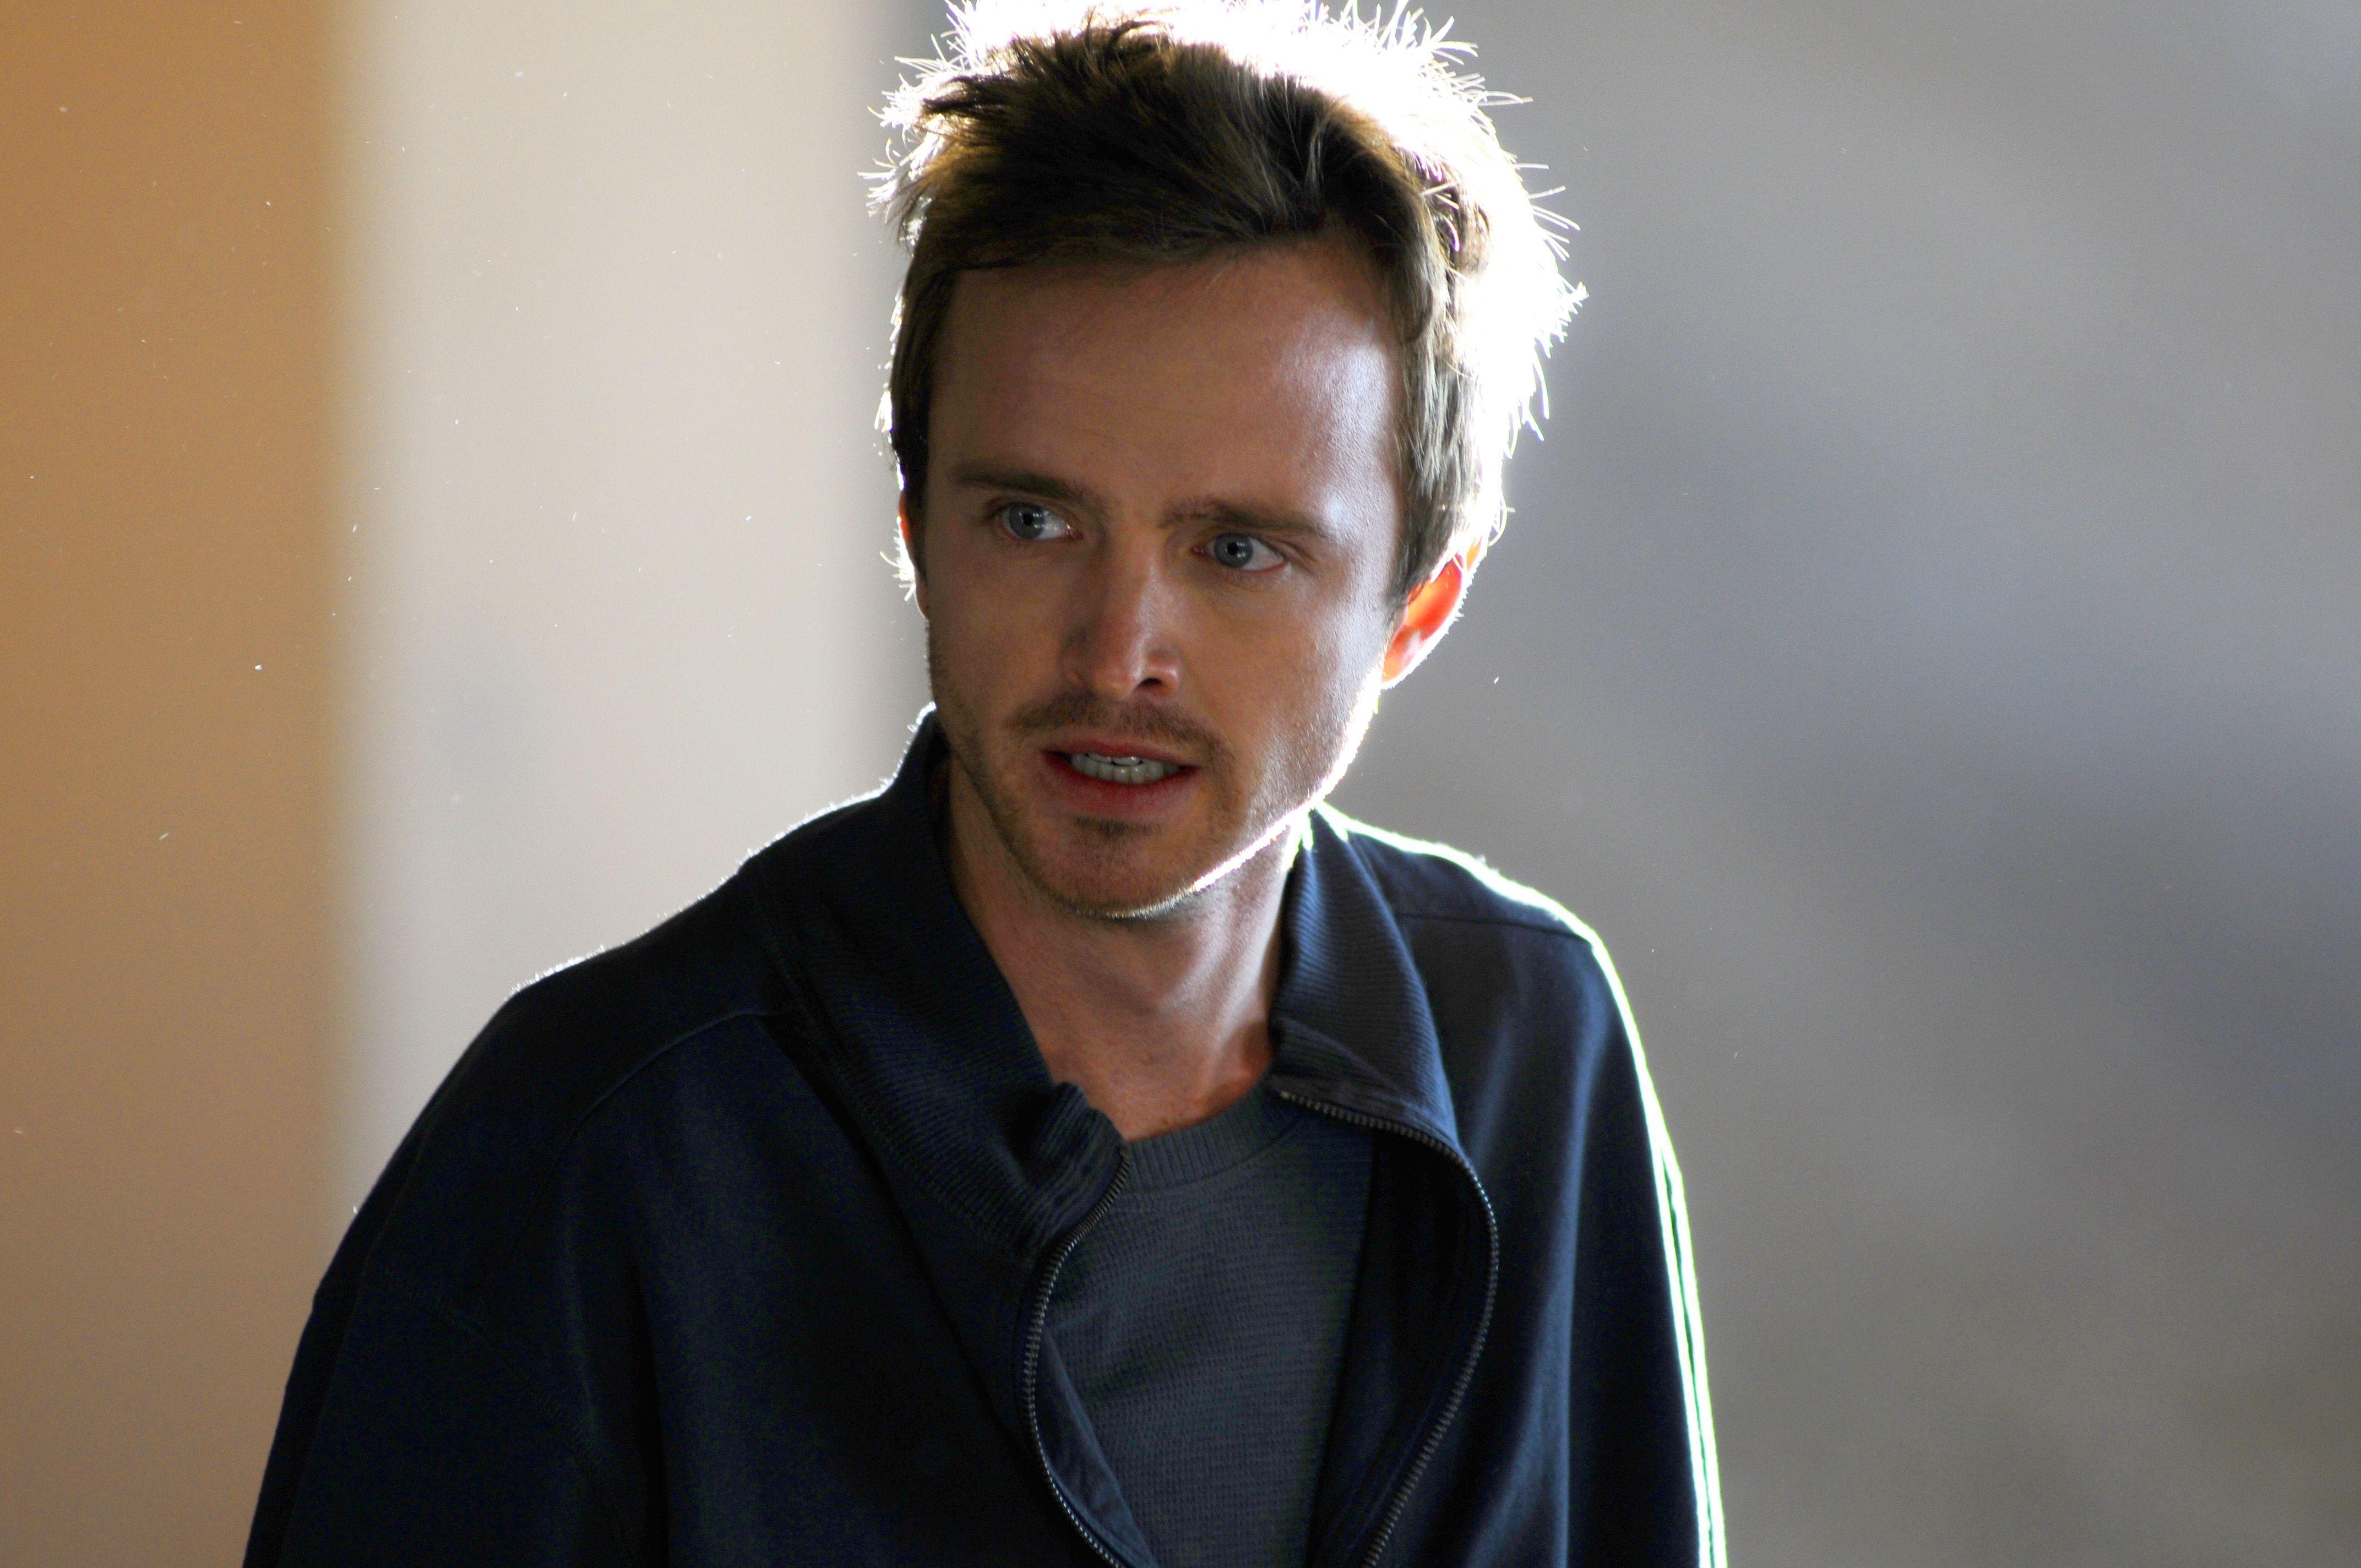 Aaron Paul Wallpaper High Resolution and Quality Download